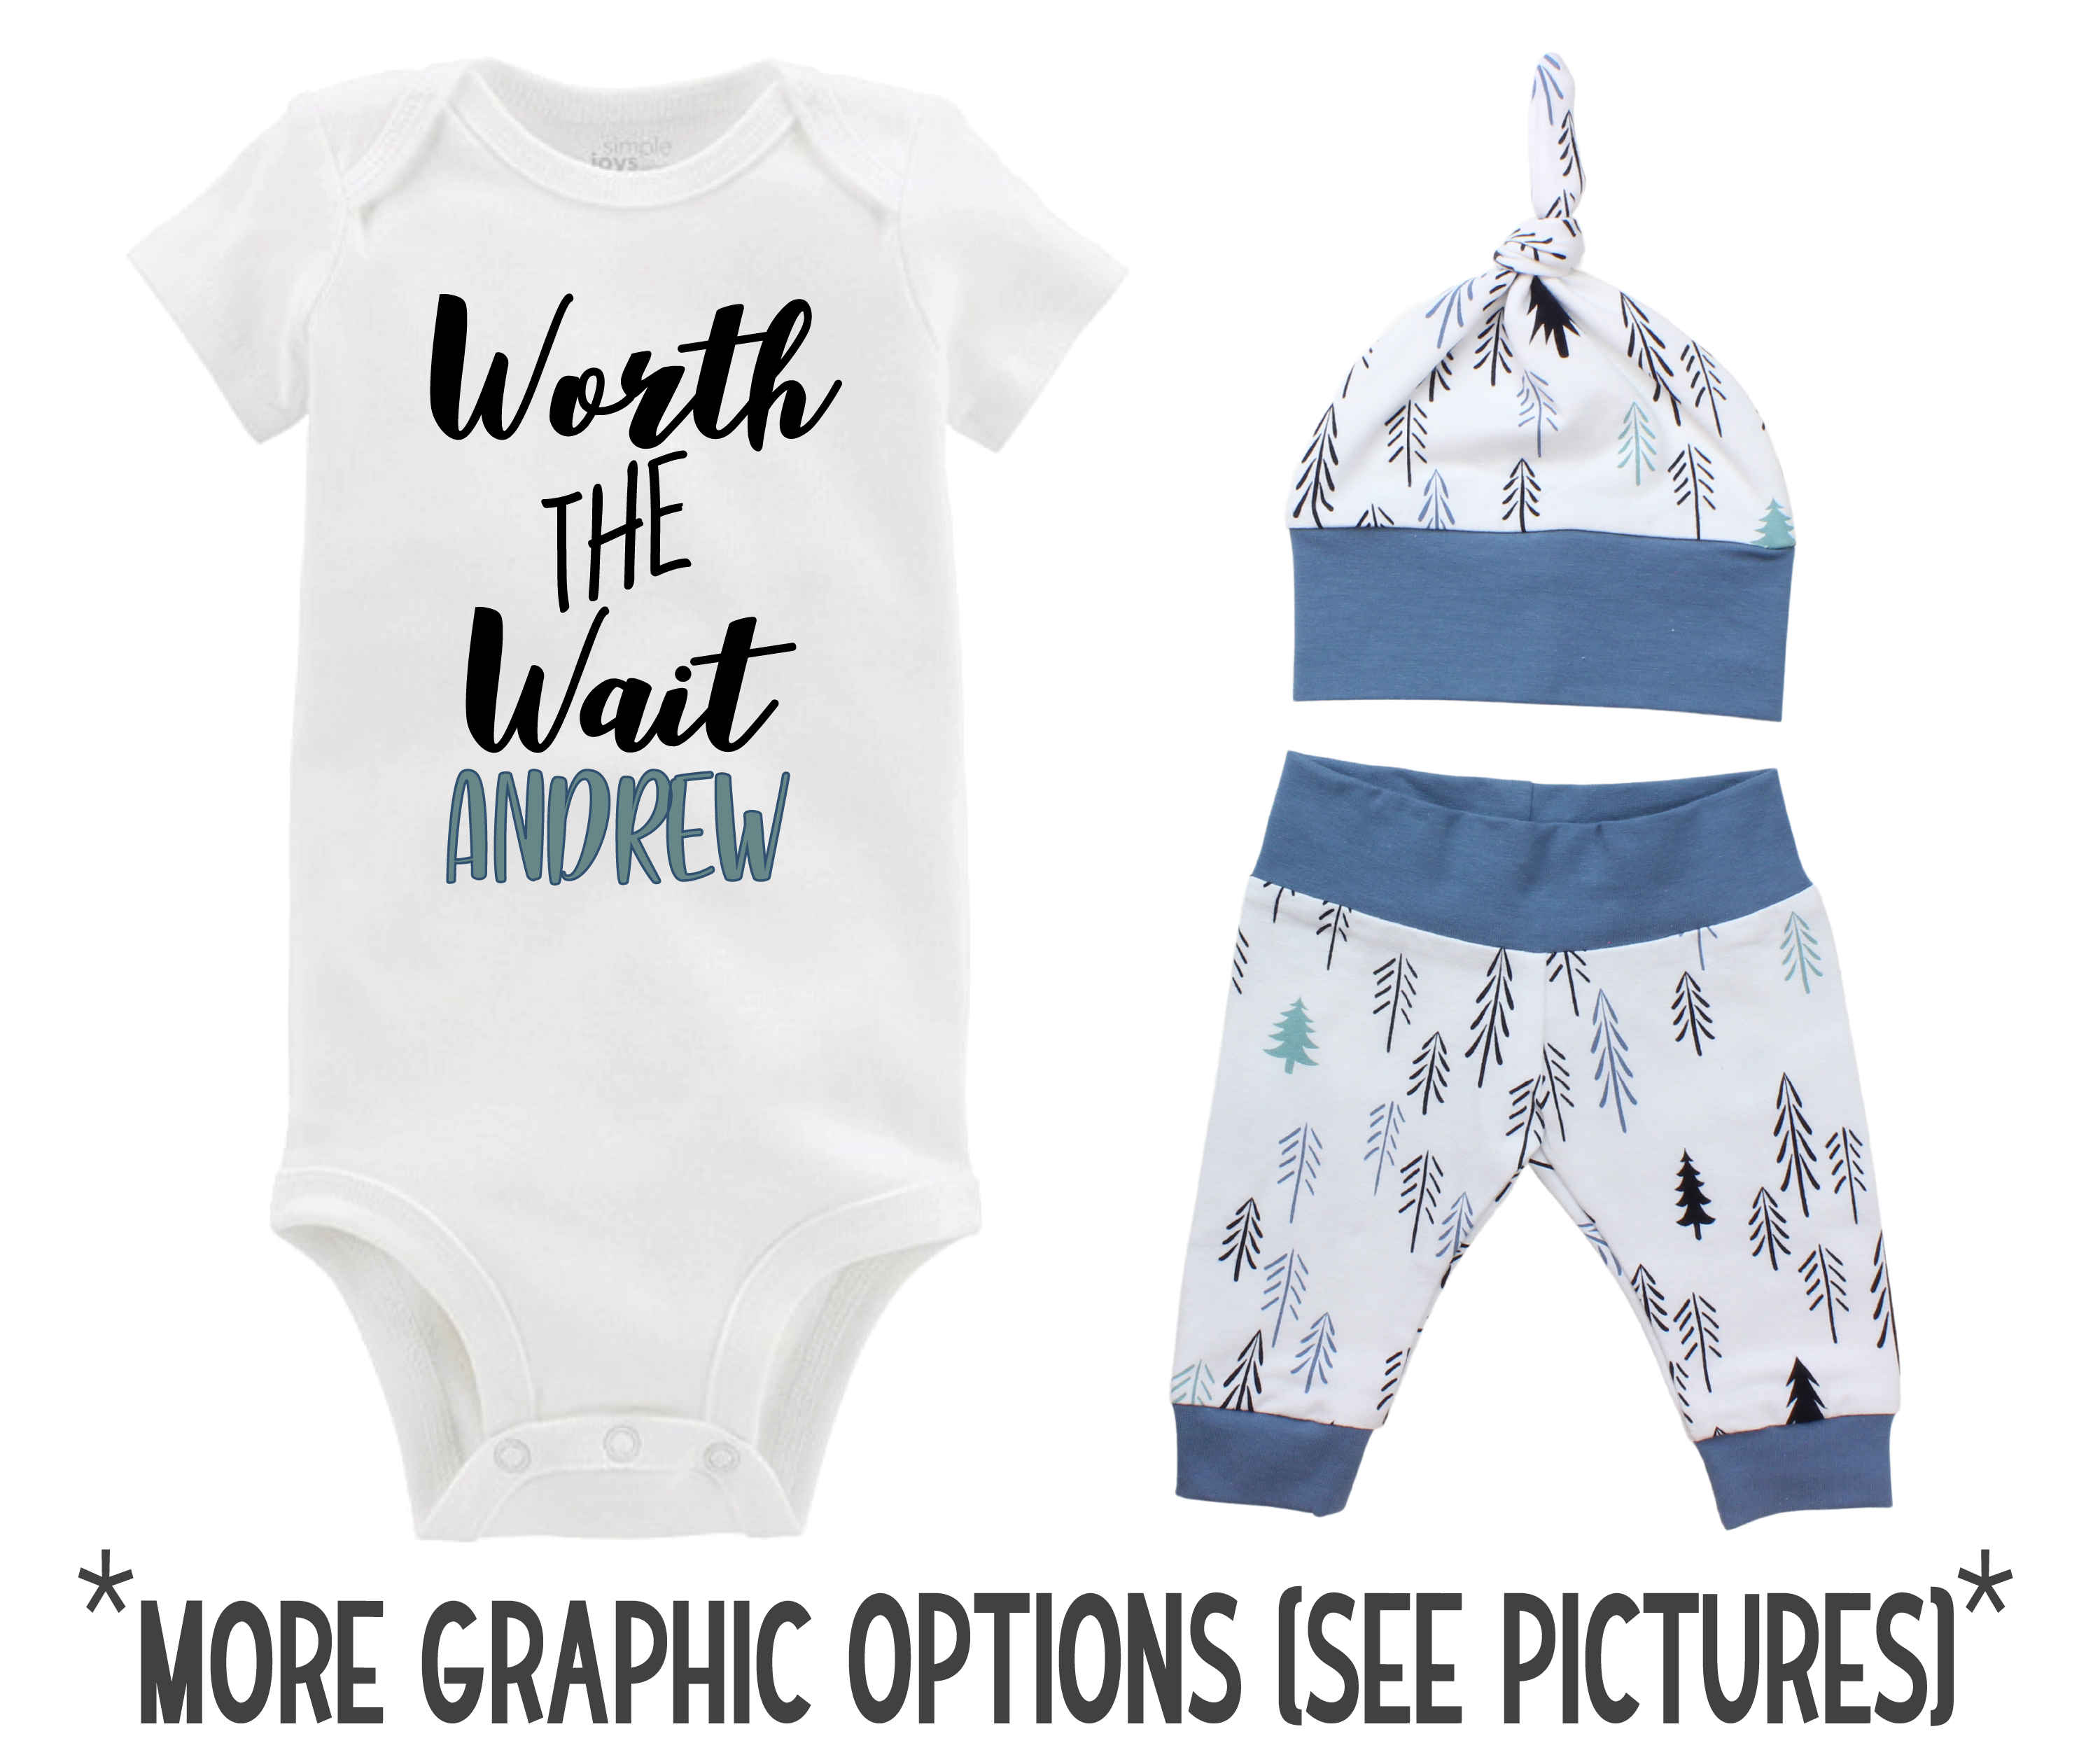 Baby Boy Blue Loblolly Pines Outfit